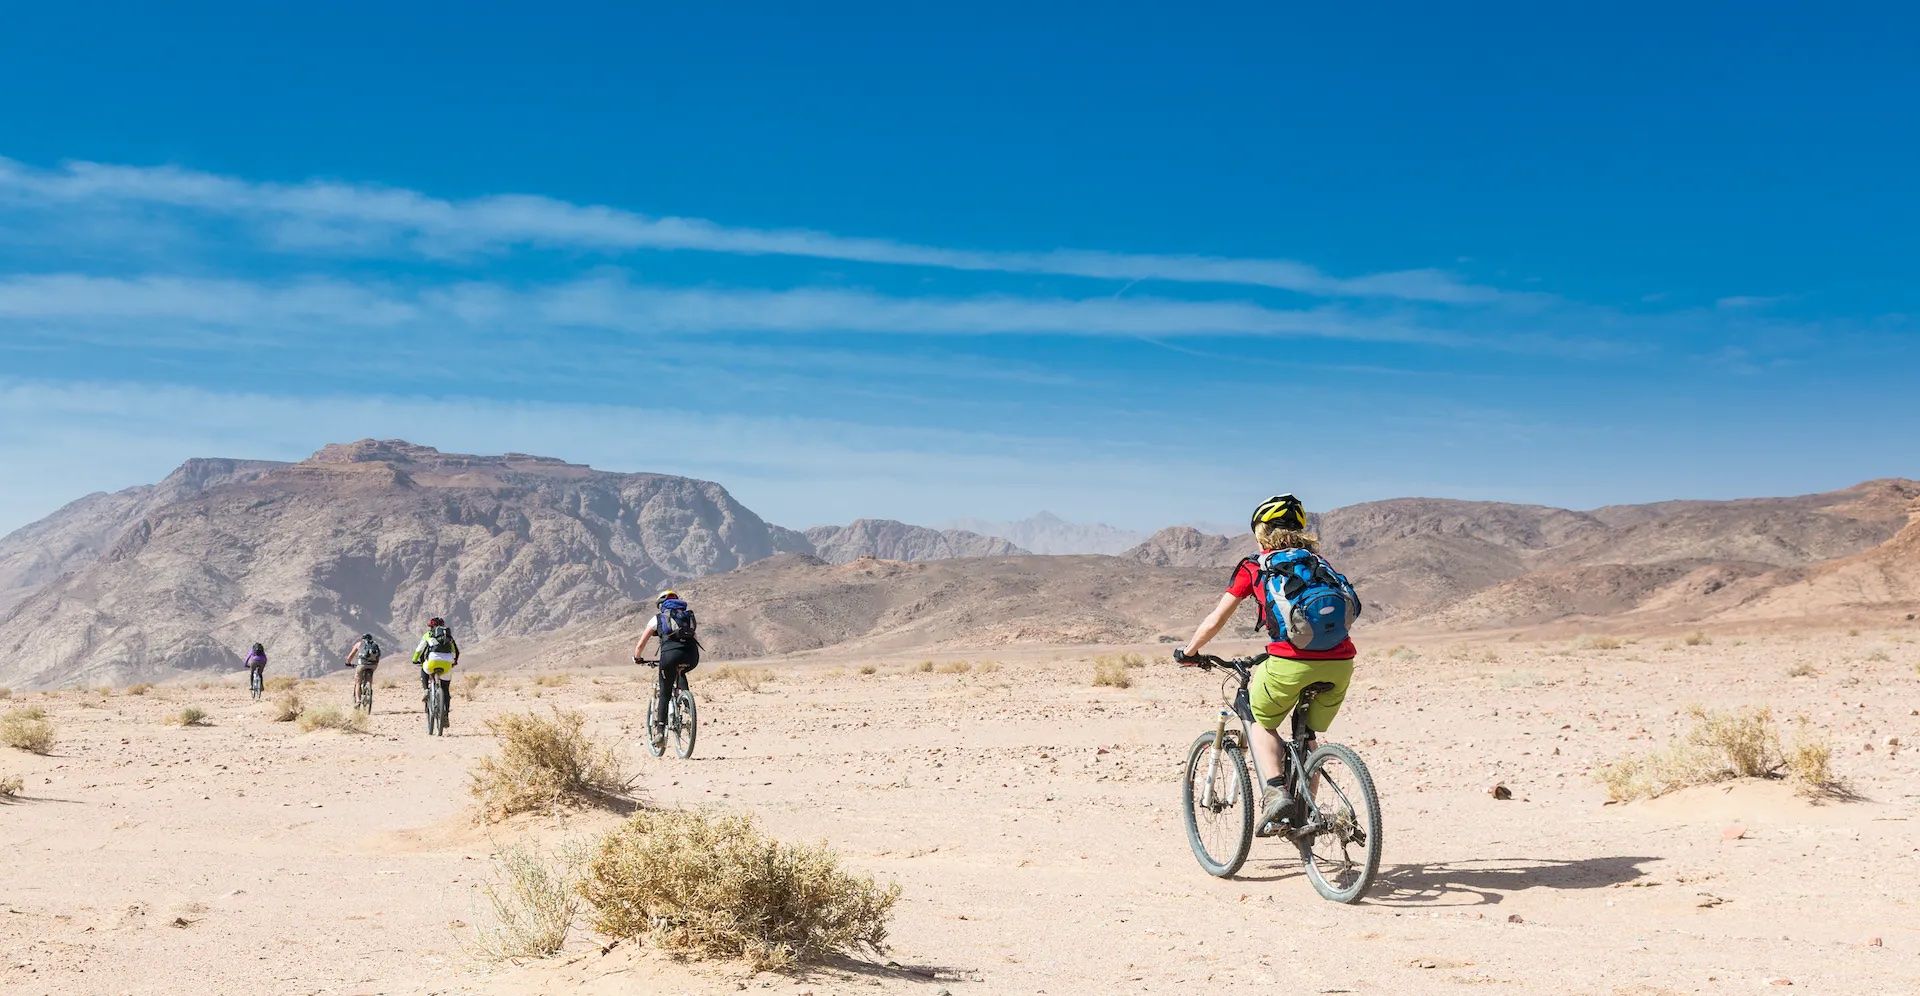 A group of cyclists riding through the desert in Jordan.